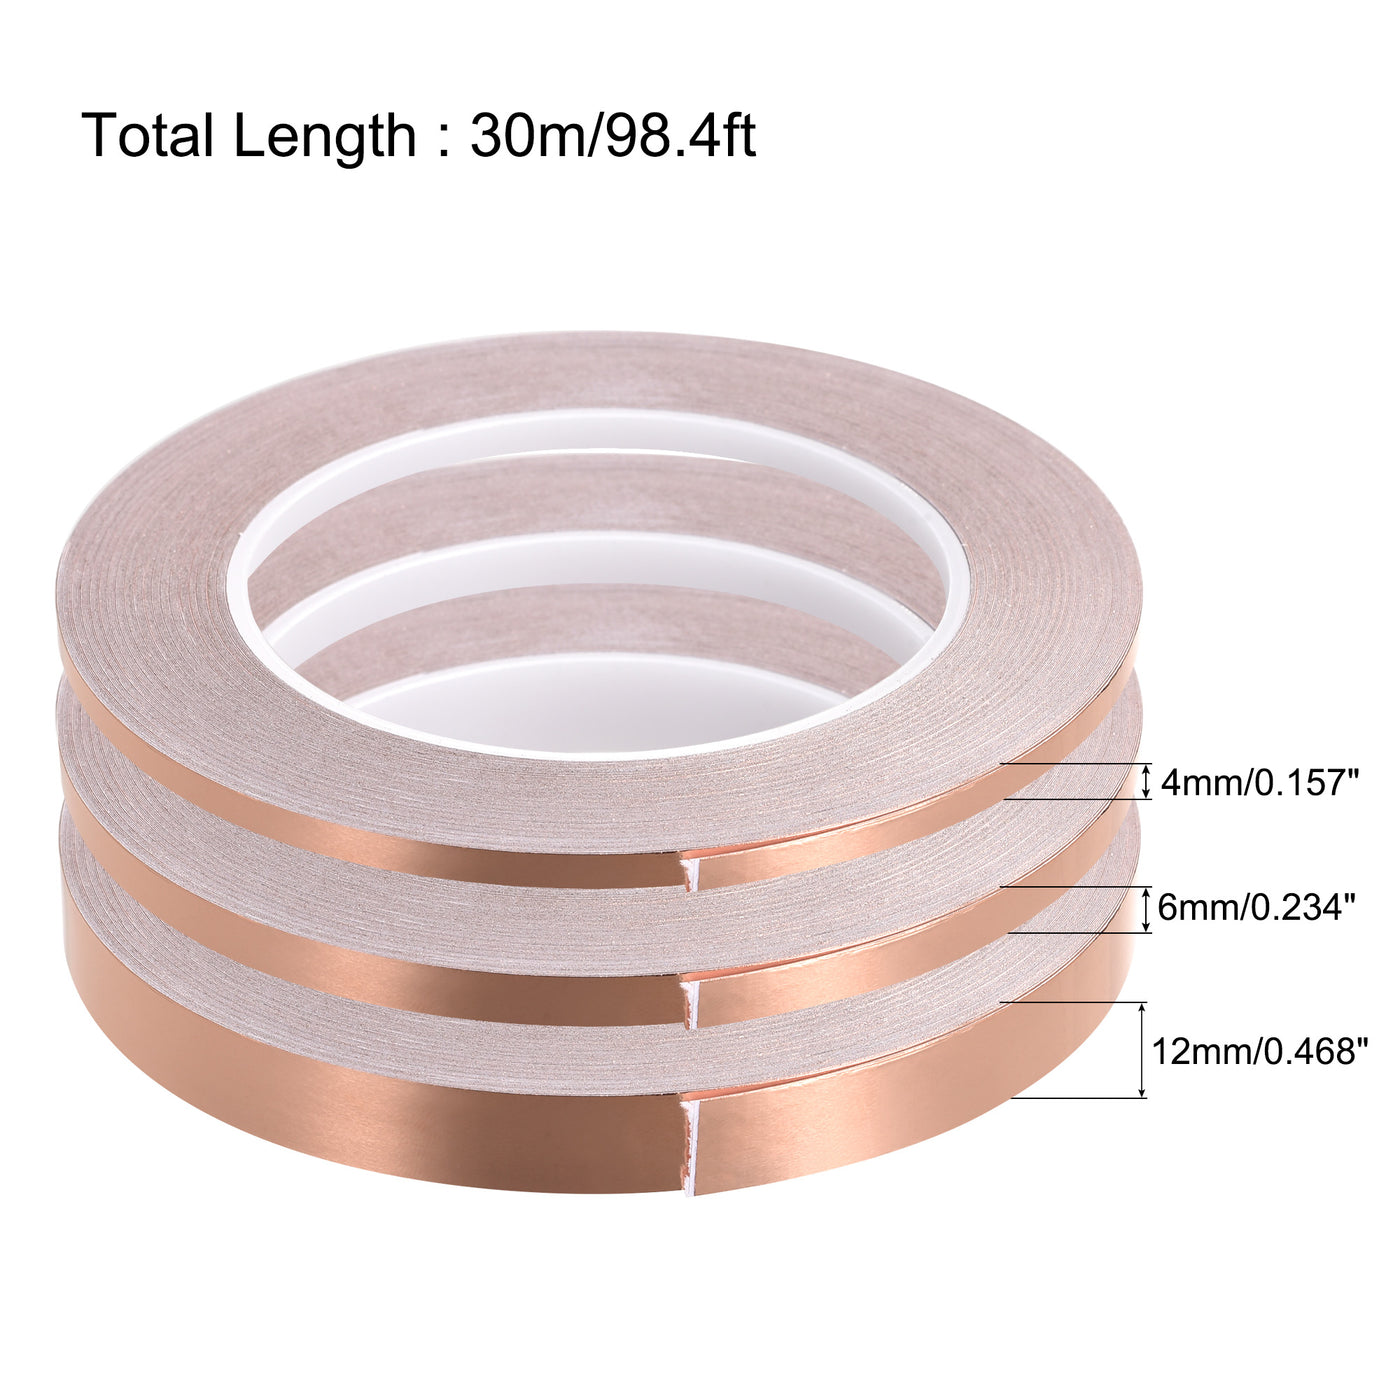 uxcell Uxcell Single-Sided Conductive Tape Copper Foil Tape 4mm/6mm/12mm x 30m/98.4ft 3pcs